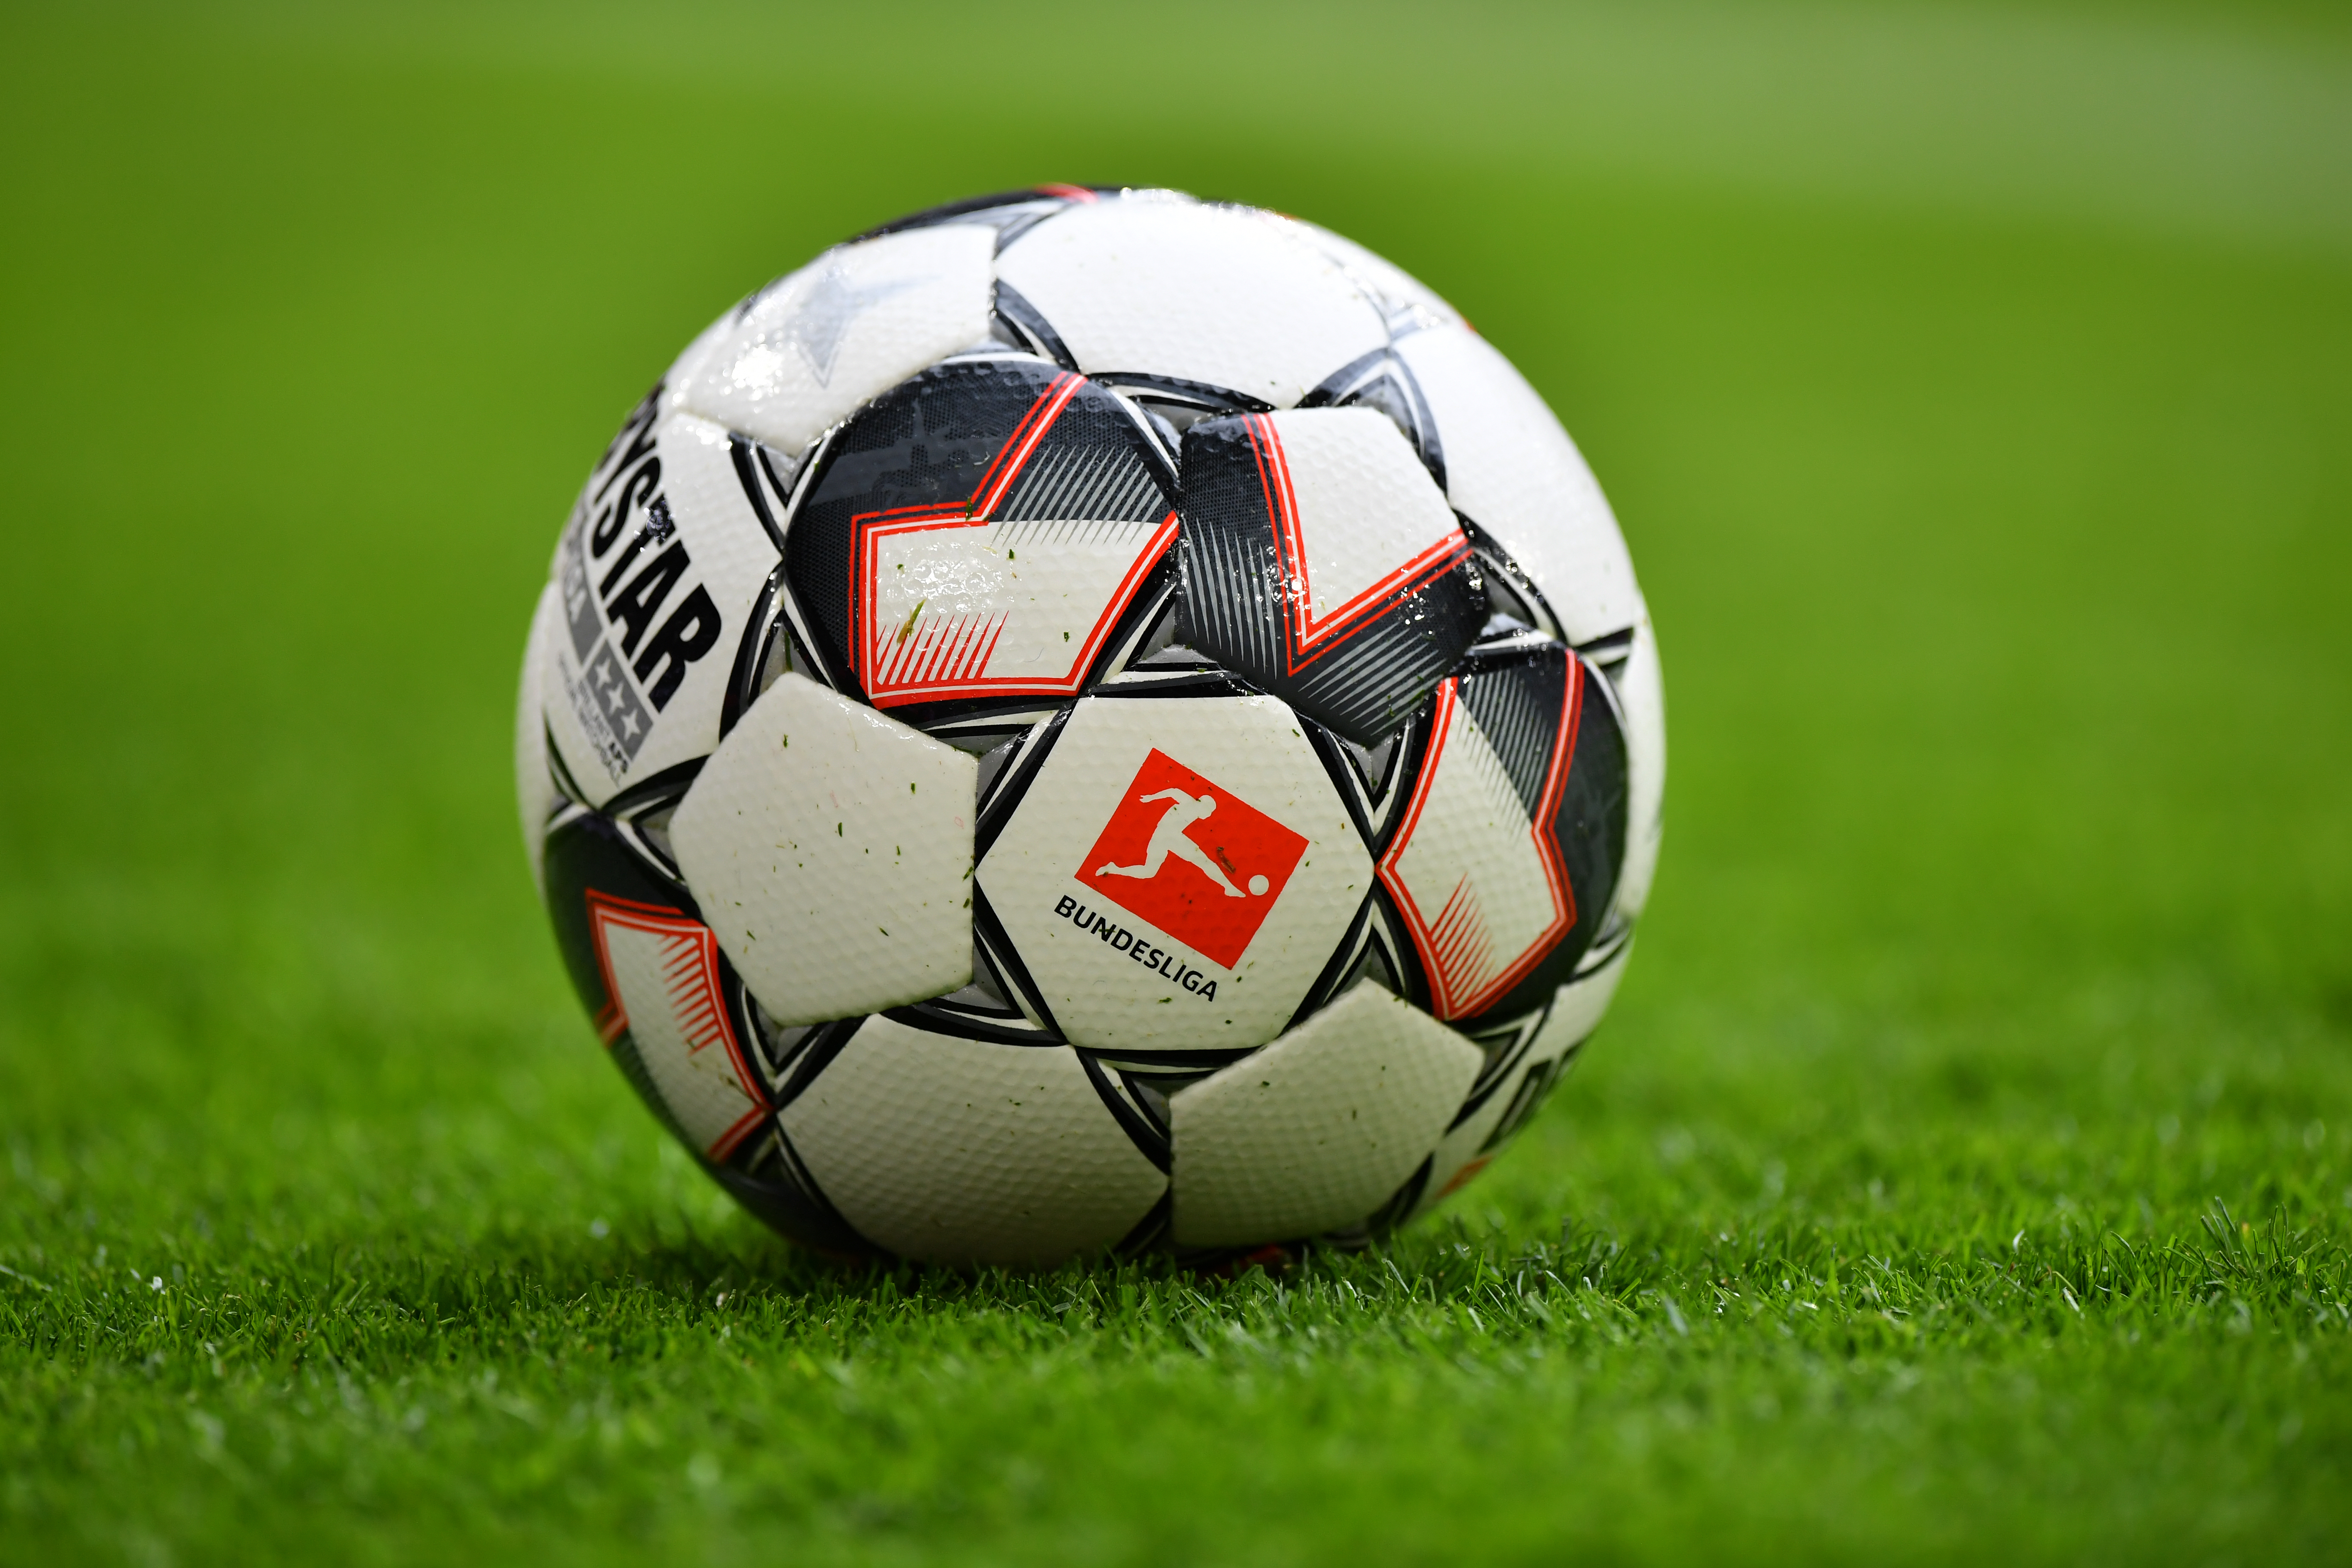 MUNICH, GERMANY - MARCH 09: The Bundesliga logo is seen on a match ball during the Bundesliga match between FC Bayern Muenchen and VfL Wolfsburg at Allianz Arena on March 09, 2019 in Munich, Germany. (Photo by Sebastian Widmann/Bongarts/Getty Images)